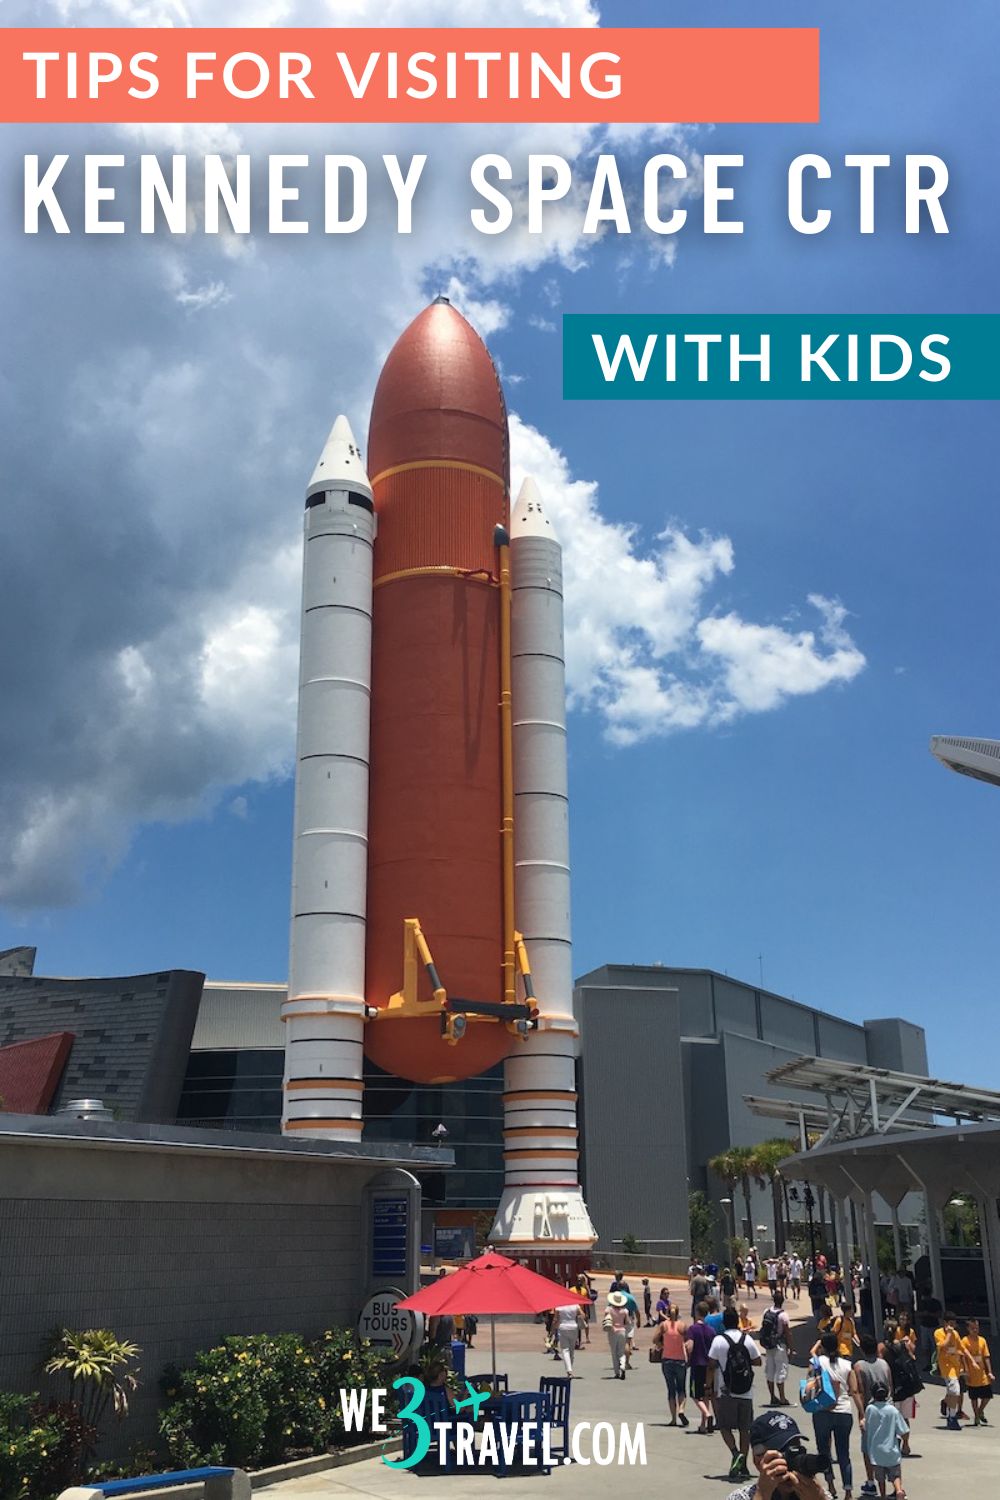 Tips for visiting Kennedy Space Center with kids. Plan ahead for your Florida vacation and make a day trip from Orlando or stay at one of the Florida beaches nearby but this is a must-see attraction for family vacations.